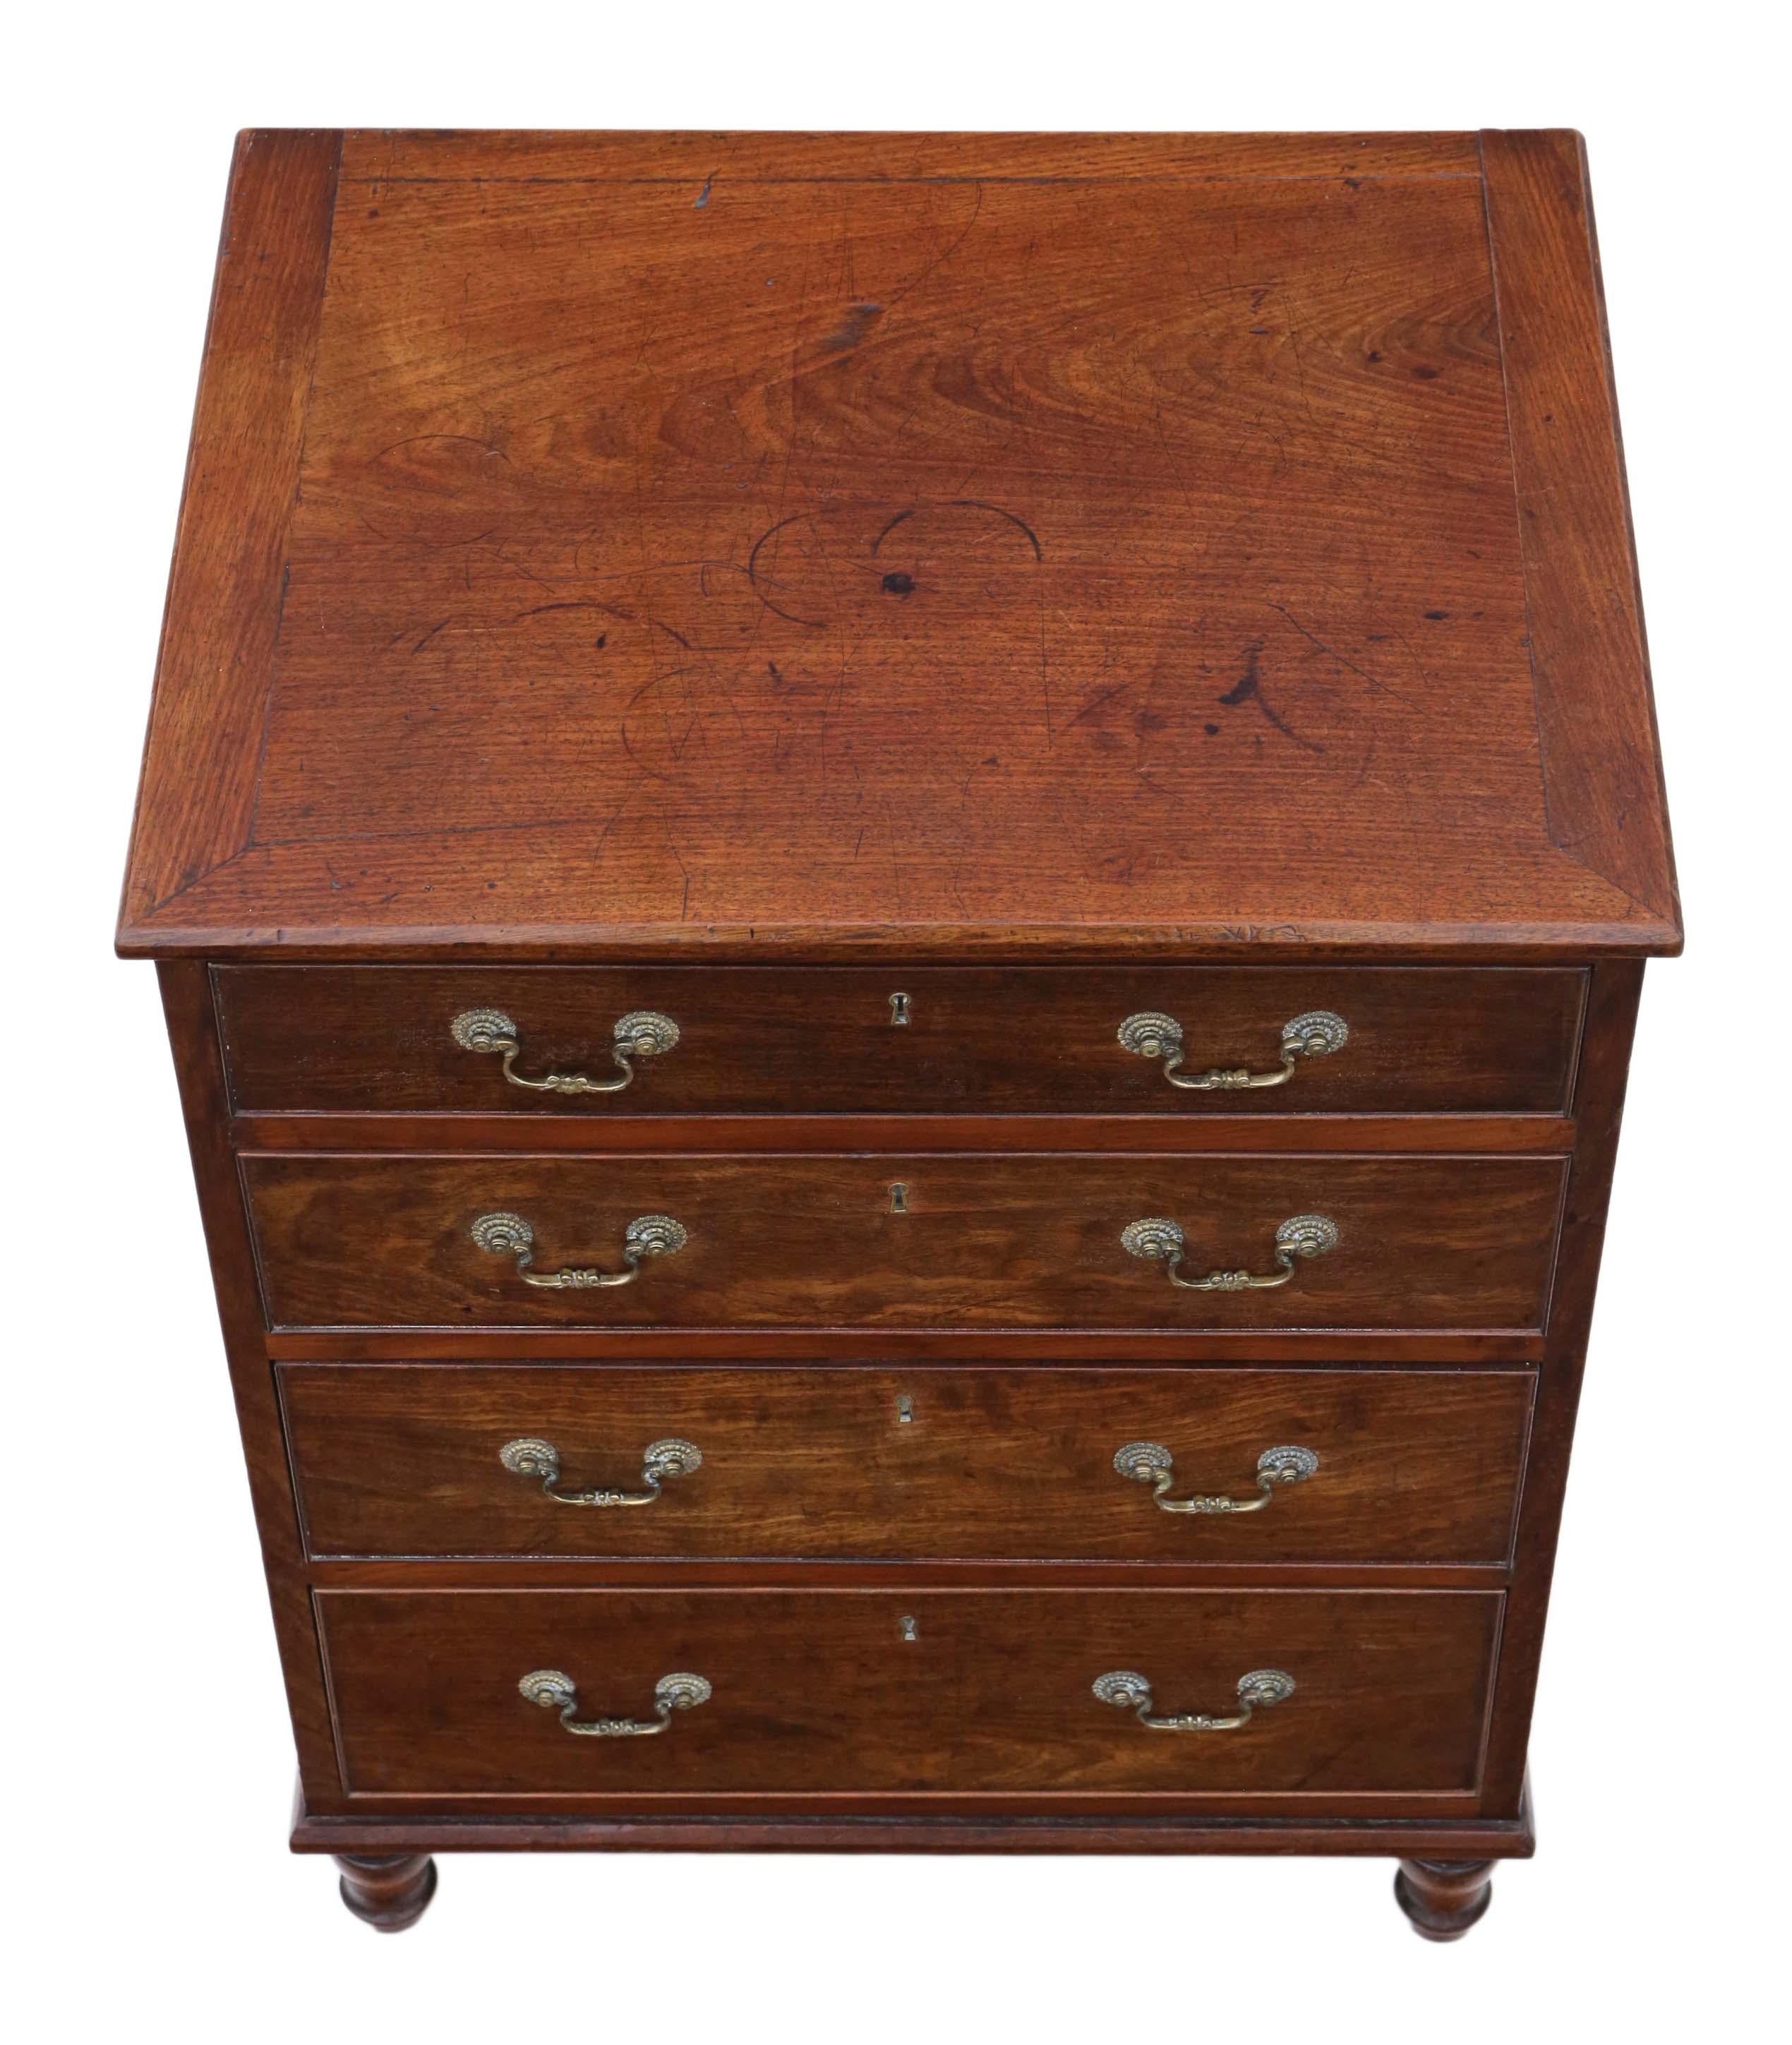 Antique fine quality small mahogany chest of drawers, 19th century.

This is a lovely chest, that is full of age and character. Solid mahogany top and sides.

A rare quality piece with clean simple lines and compact dimensions. Original handles